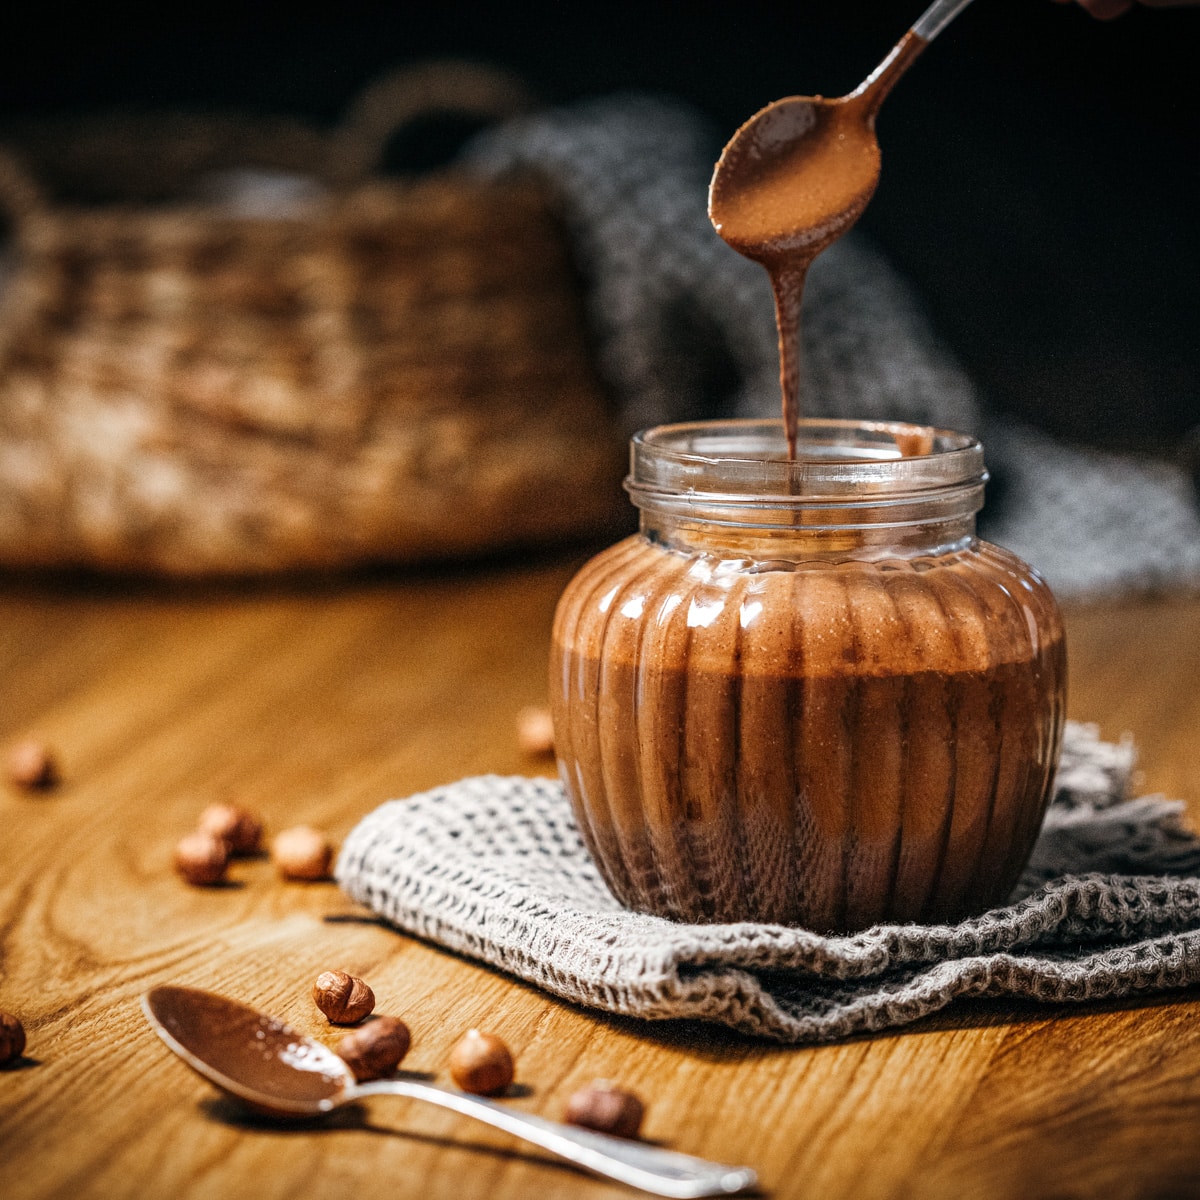 A jar with brown chocolate cream and a spoon pouring the cream into the jar.